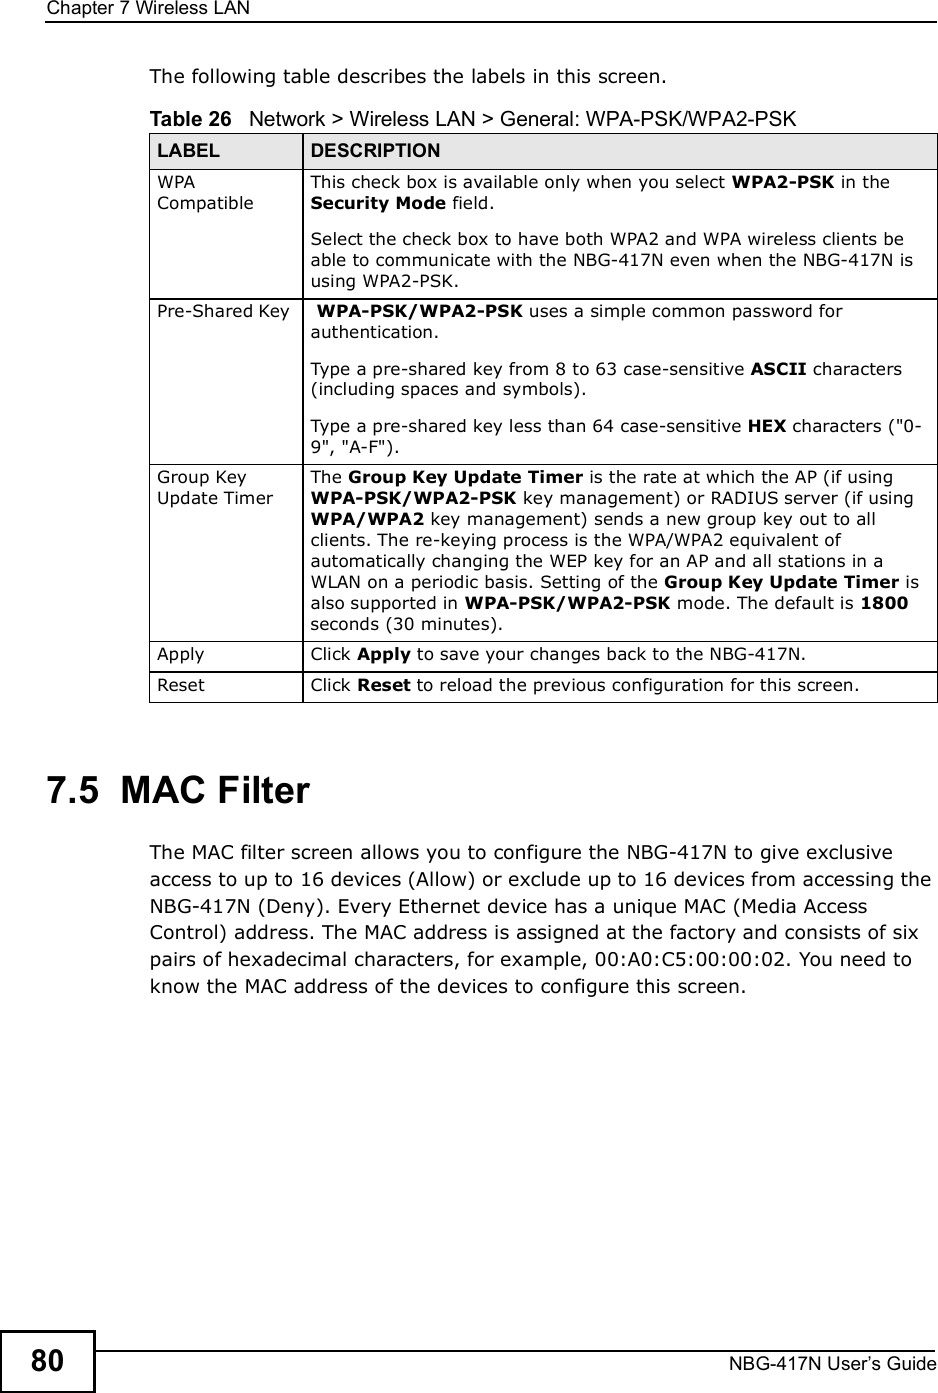 Chapter 7Wireless LANNBG-417N User s Guide80The following table describes the labels in this screen.7.5  MAC FilterThe MAC filter screen allows you to configure the NBG-417N to give exclusive access to up to 16 devices (Allow) or exclude up to 16 devices from accessing the NBG-417N (Deny). Every Ethernet device has a unique MAC (Media Access Control) address. The MAC address is assigned at the factory and consists of six pairs of hexadecimal characters, for example, 00:A0:C5:00:00:02. You need to know the MAC address of the devices to configure this screen.Table 26   Network &gt; Wireless LAN &gt; General: WPA-PSK/WPA2-PSKLABEL DESCRIPTIONWPA CompatibleThis check box is available only when you select WPA2-PSK in the Security Mode field.Select the check box to have both WPA2 and WPA wireless clients be able to communicate with the NBG-417N even when the NBG-417N is using WPA2-PSK.Pre-Shared Key   WPA-PSK/WPA2-PSK uses a simple common password for authentication.Type a pre-shared key from 8 to 63 case-sensitive ASCII characters (including spaces and symbols).Type a pre-shared key less than 64 case-sensitive HEX characters (&quot;0-9&quot;, &quot;A-F&quot;).Group Key Update TimerThe Group Key Update Timer is the rate at which the AP (if using WPA-PSK/WPA2-PSK key management) or RADIUS server (if using WPA/WPA2 key management) sends a new group key out to all clients. The re-keying process is the WPA/WPA2 equivalent of automatically changing the WEP key for an AP and all stations in a WLAN on a periodic basis. Setting of the Group Key Update Timer is also supported in WPA-PSK/WPA2-PSK mode. The default is 1800 seconds (30 minutes).Apply Click Apply to save your changes back to the NBG-417N.Reset Click Reset to reload the previous configuration for this screen.